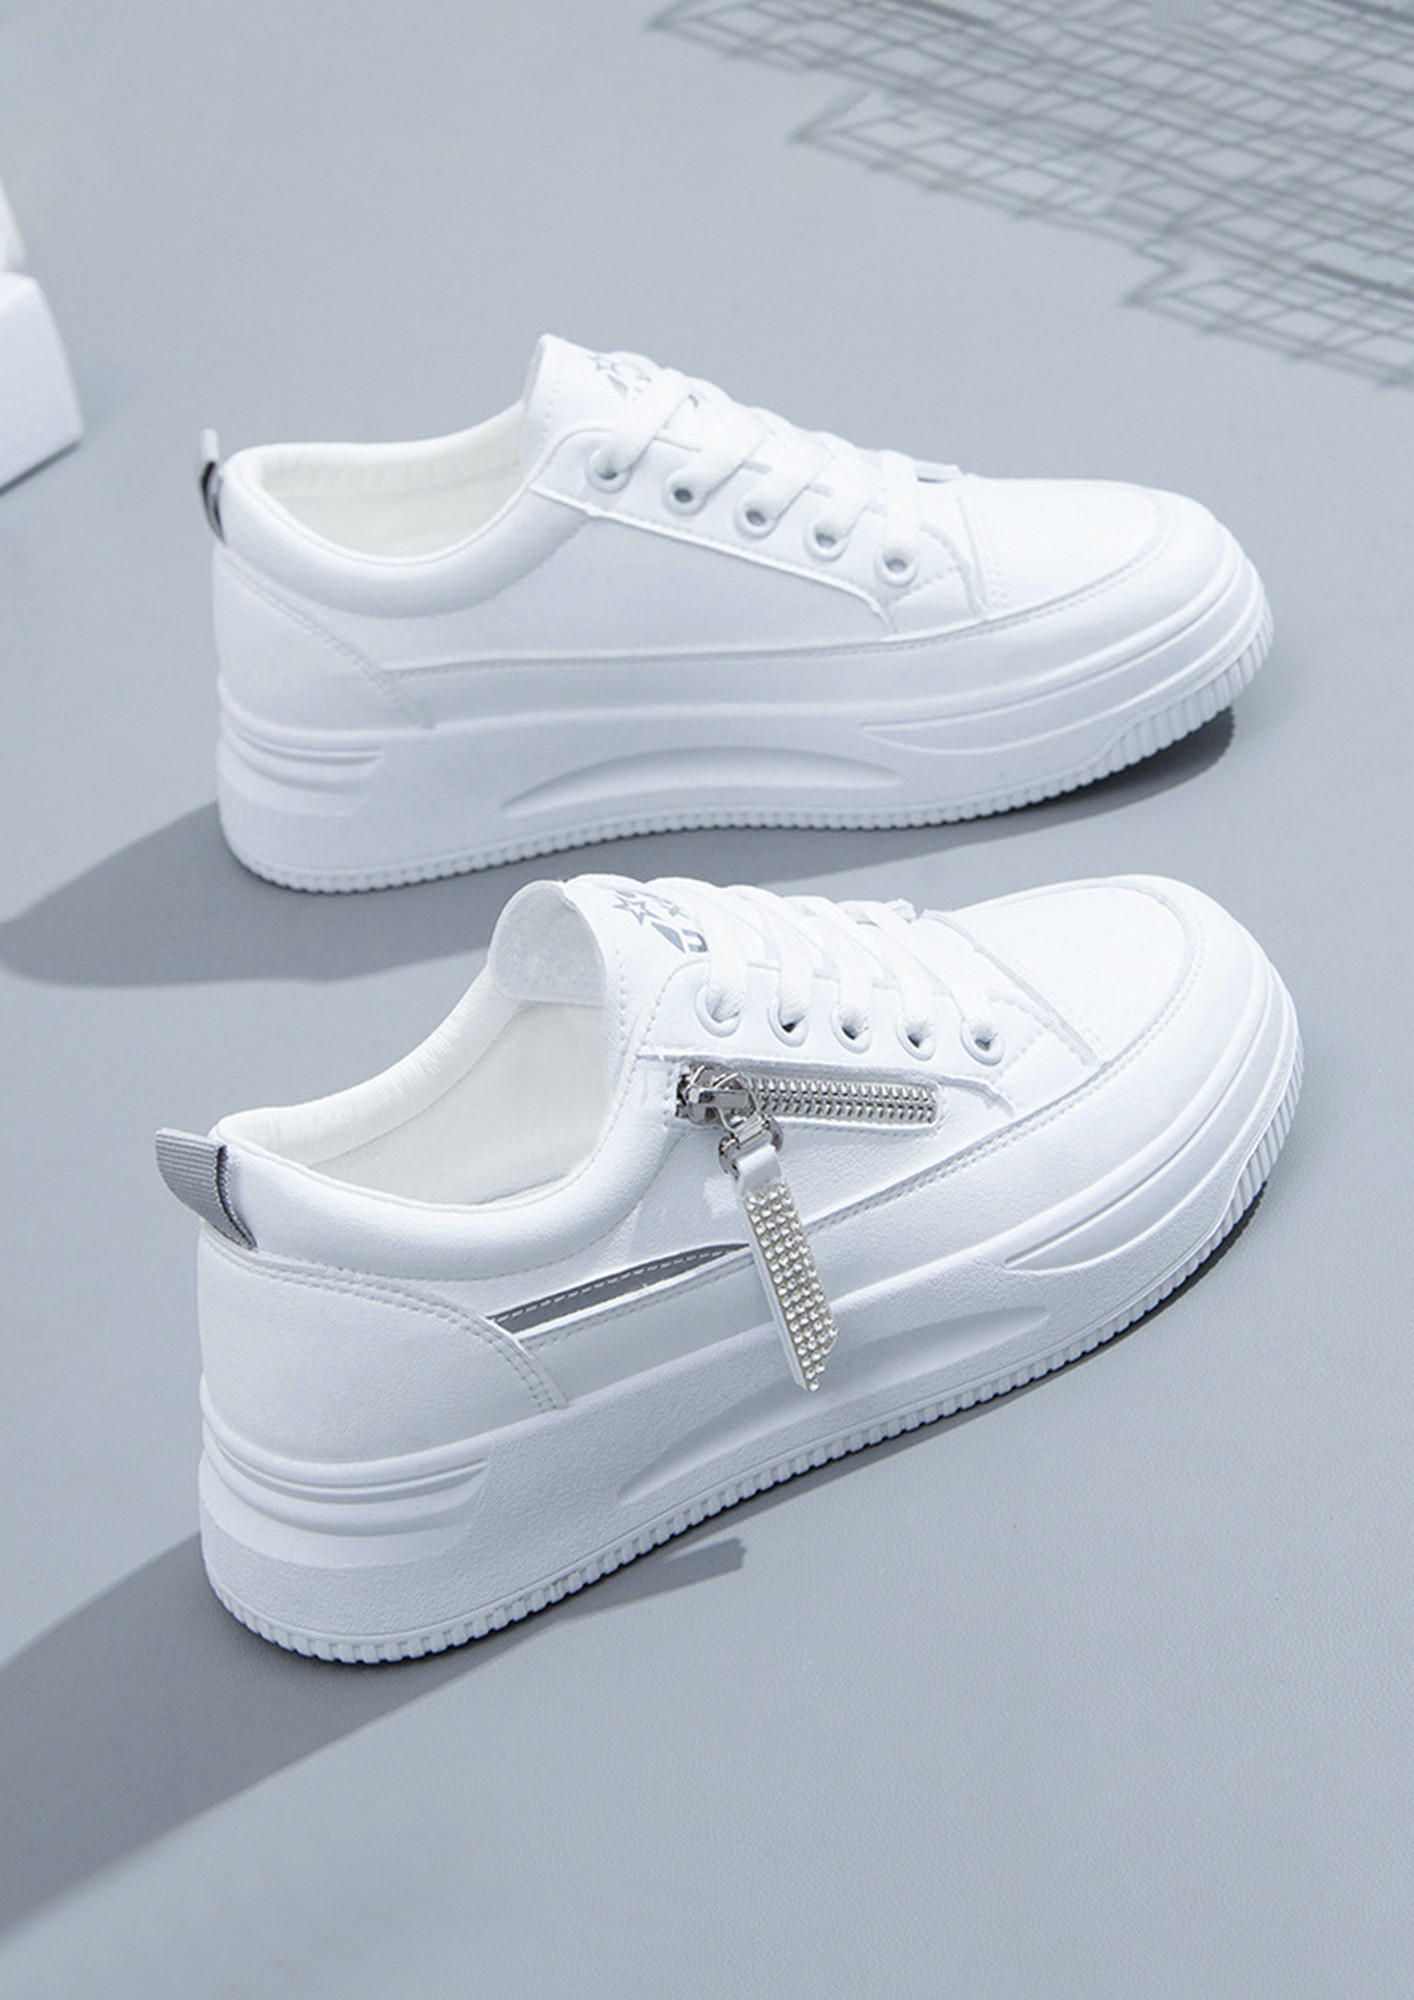 Aggregate more than 192 white sneakers women 2020 latest